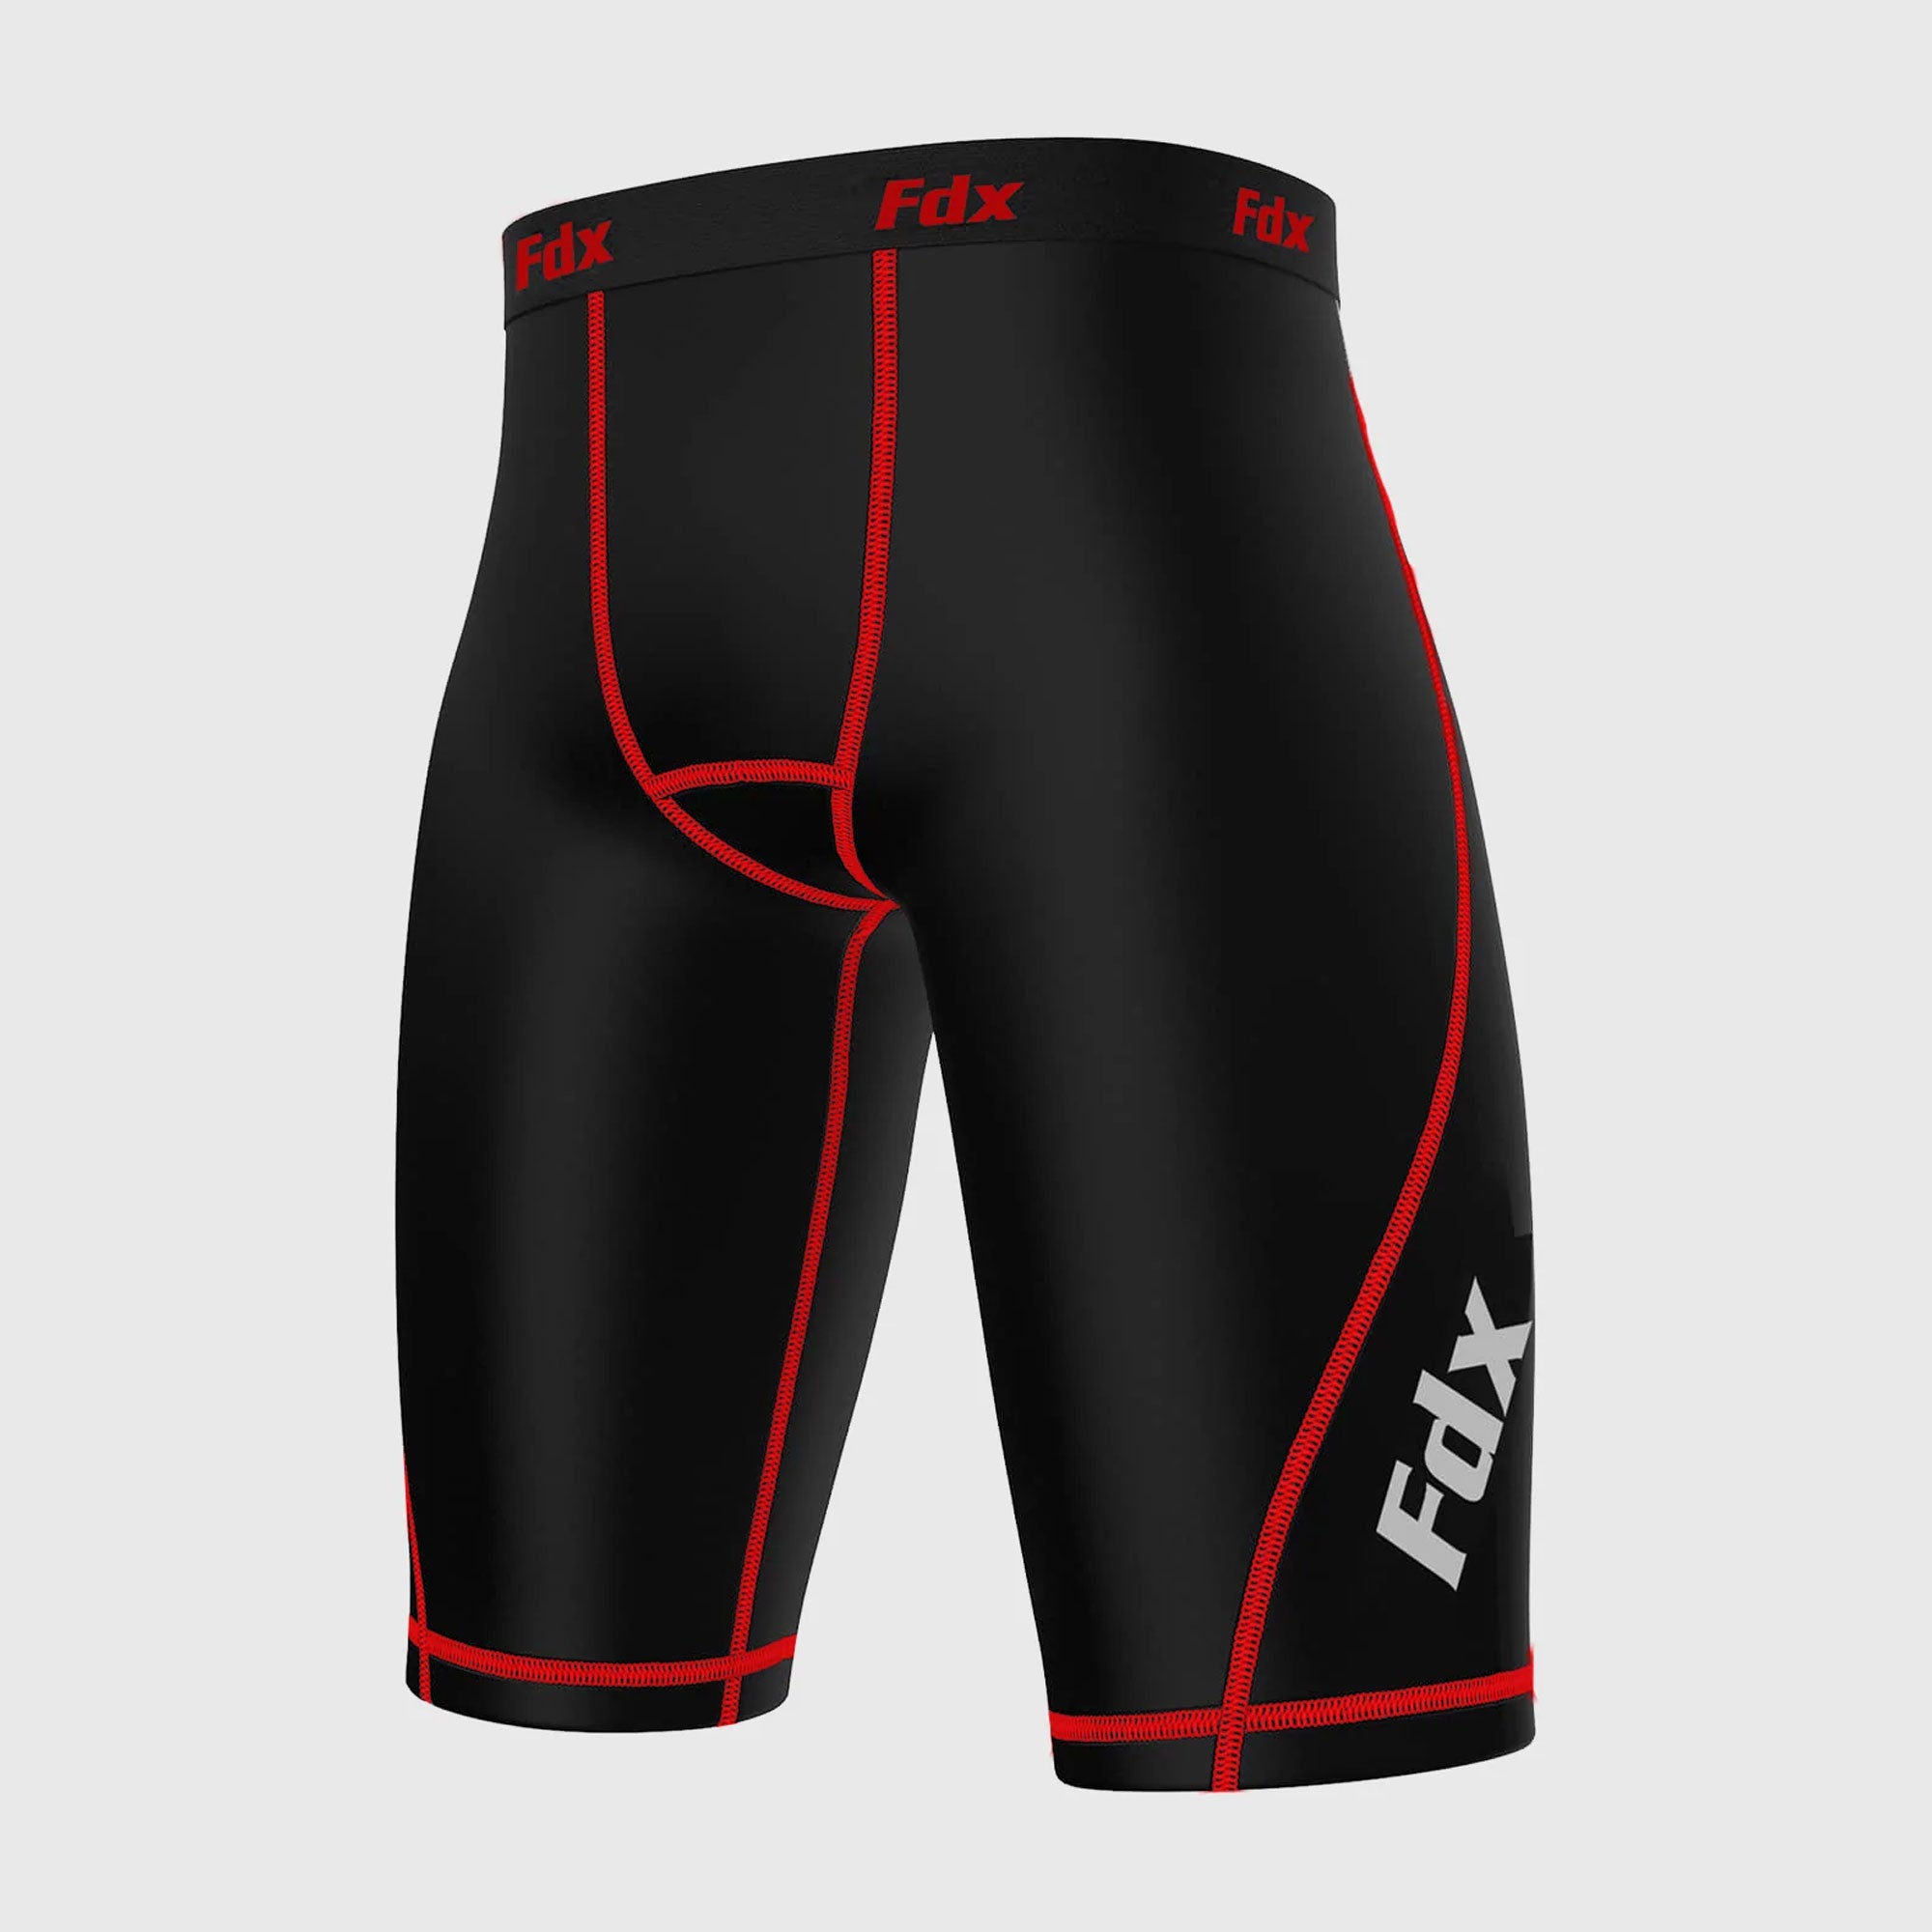 Fdx Men's Black & Red Compression Shorts Gym Workout Running Athletic Yoga Elastic Waistband Stretchable Breathable